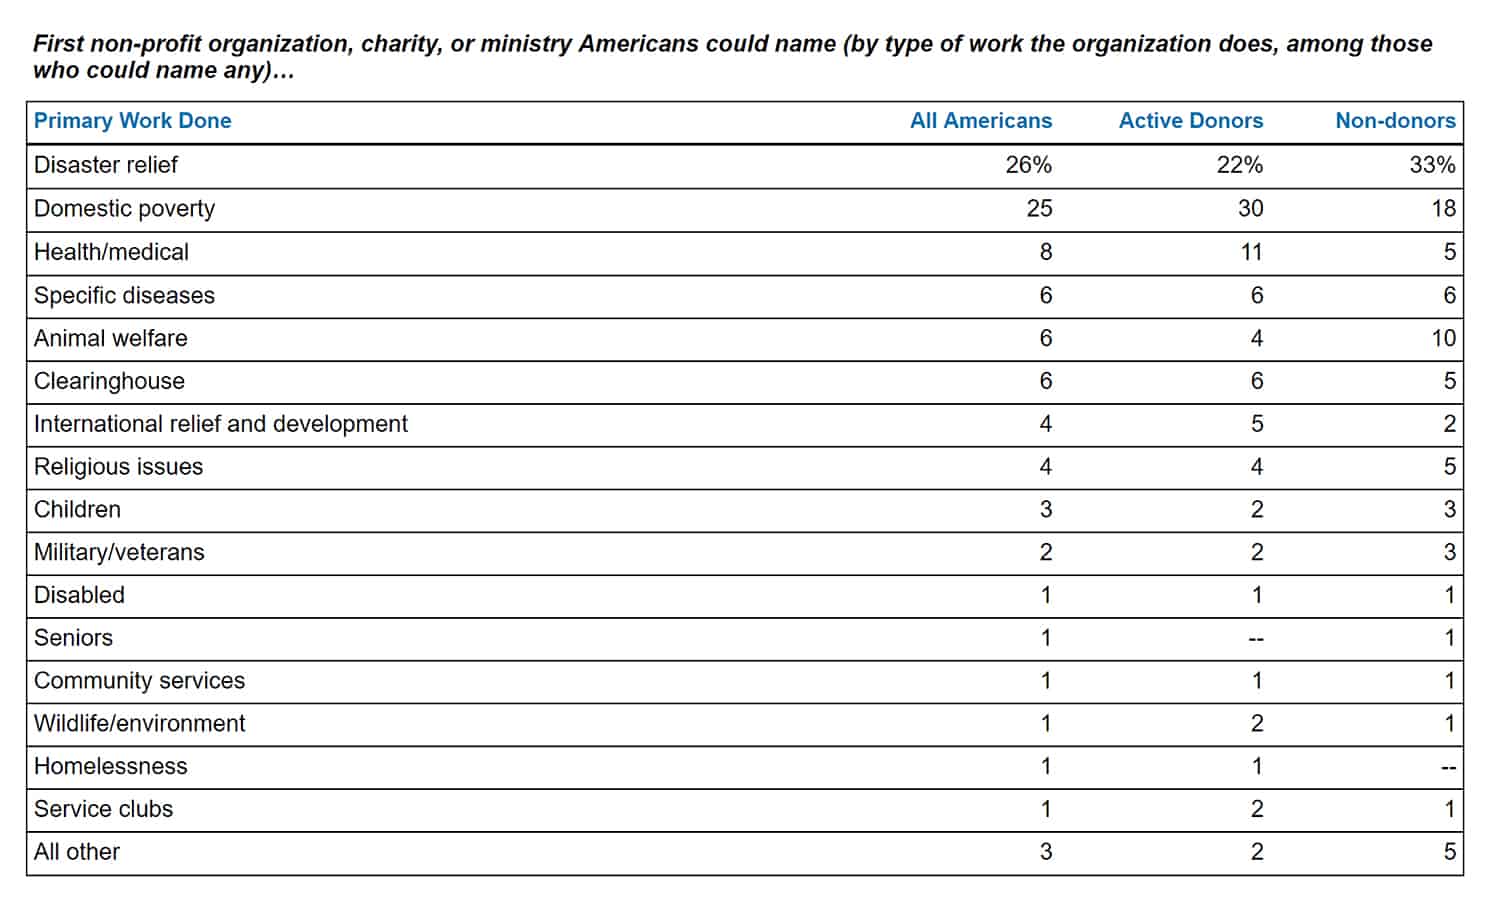 What non-profit organizations do Americans think of first?